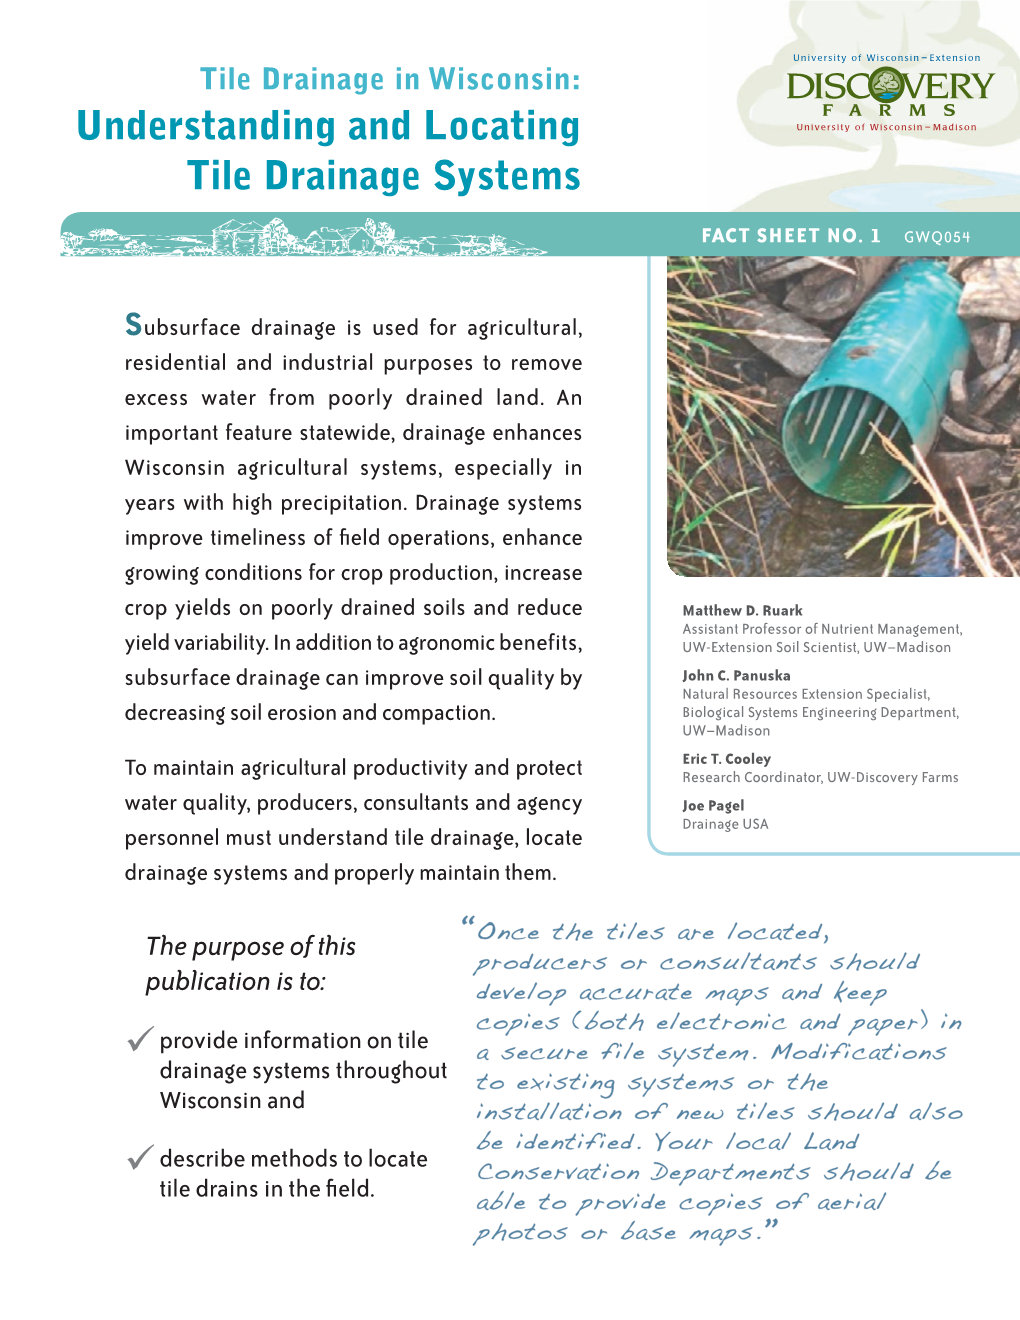 Understanding and Locating Tile Drainage Systems